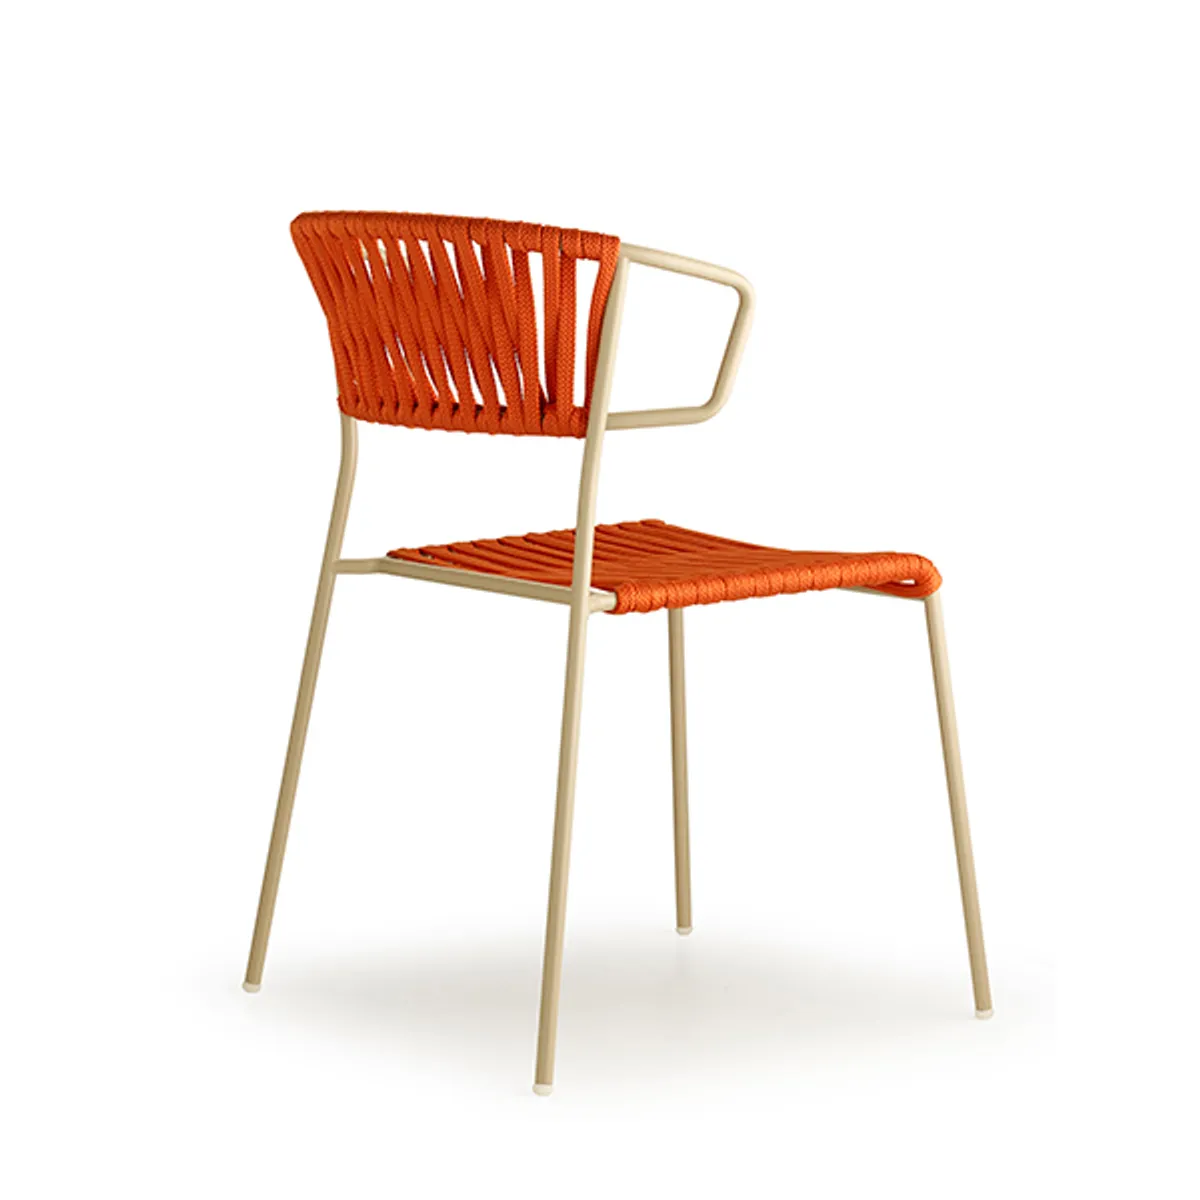 Robyn Weave Chair Outdoor Hospitality Furniture Insideoutcontracts Orange 081